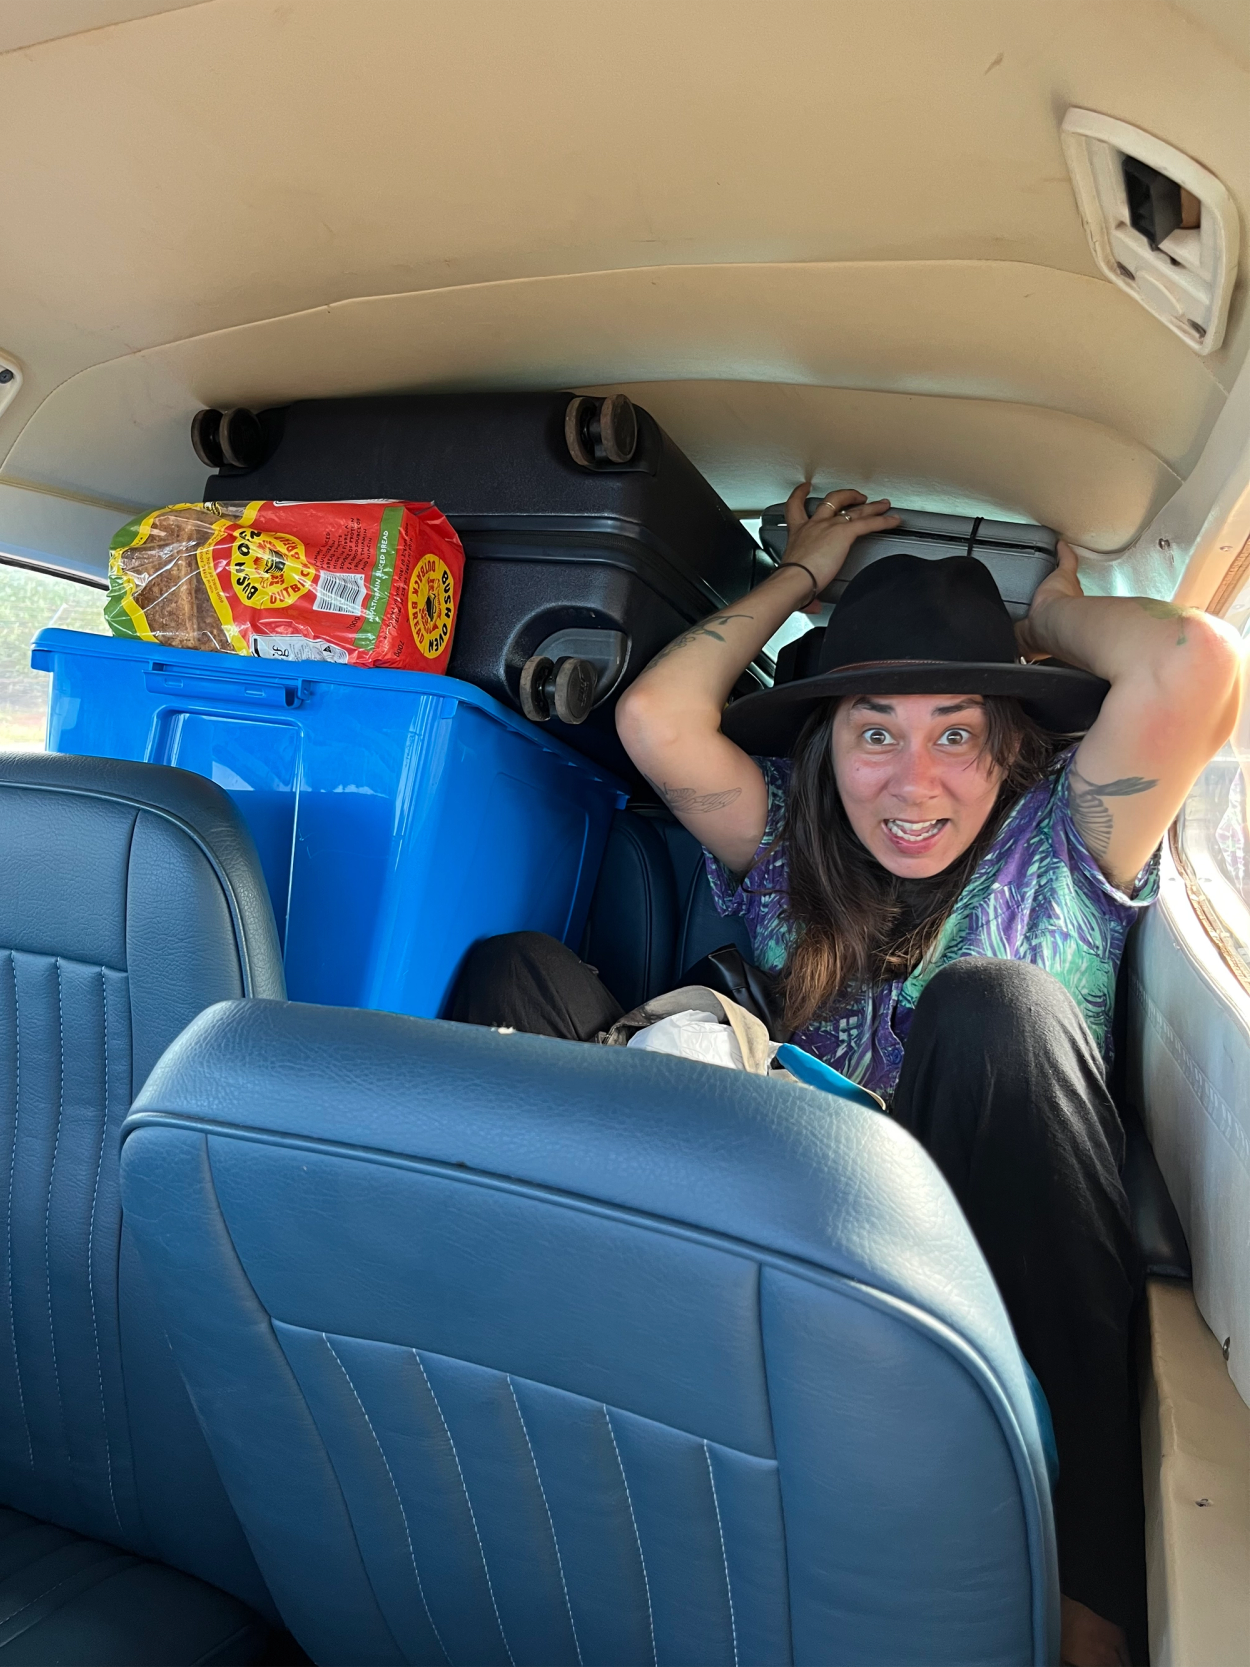 A woman sits in the back of a van with suitcases and bags packed in around her. She has a comical expression on her face.